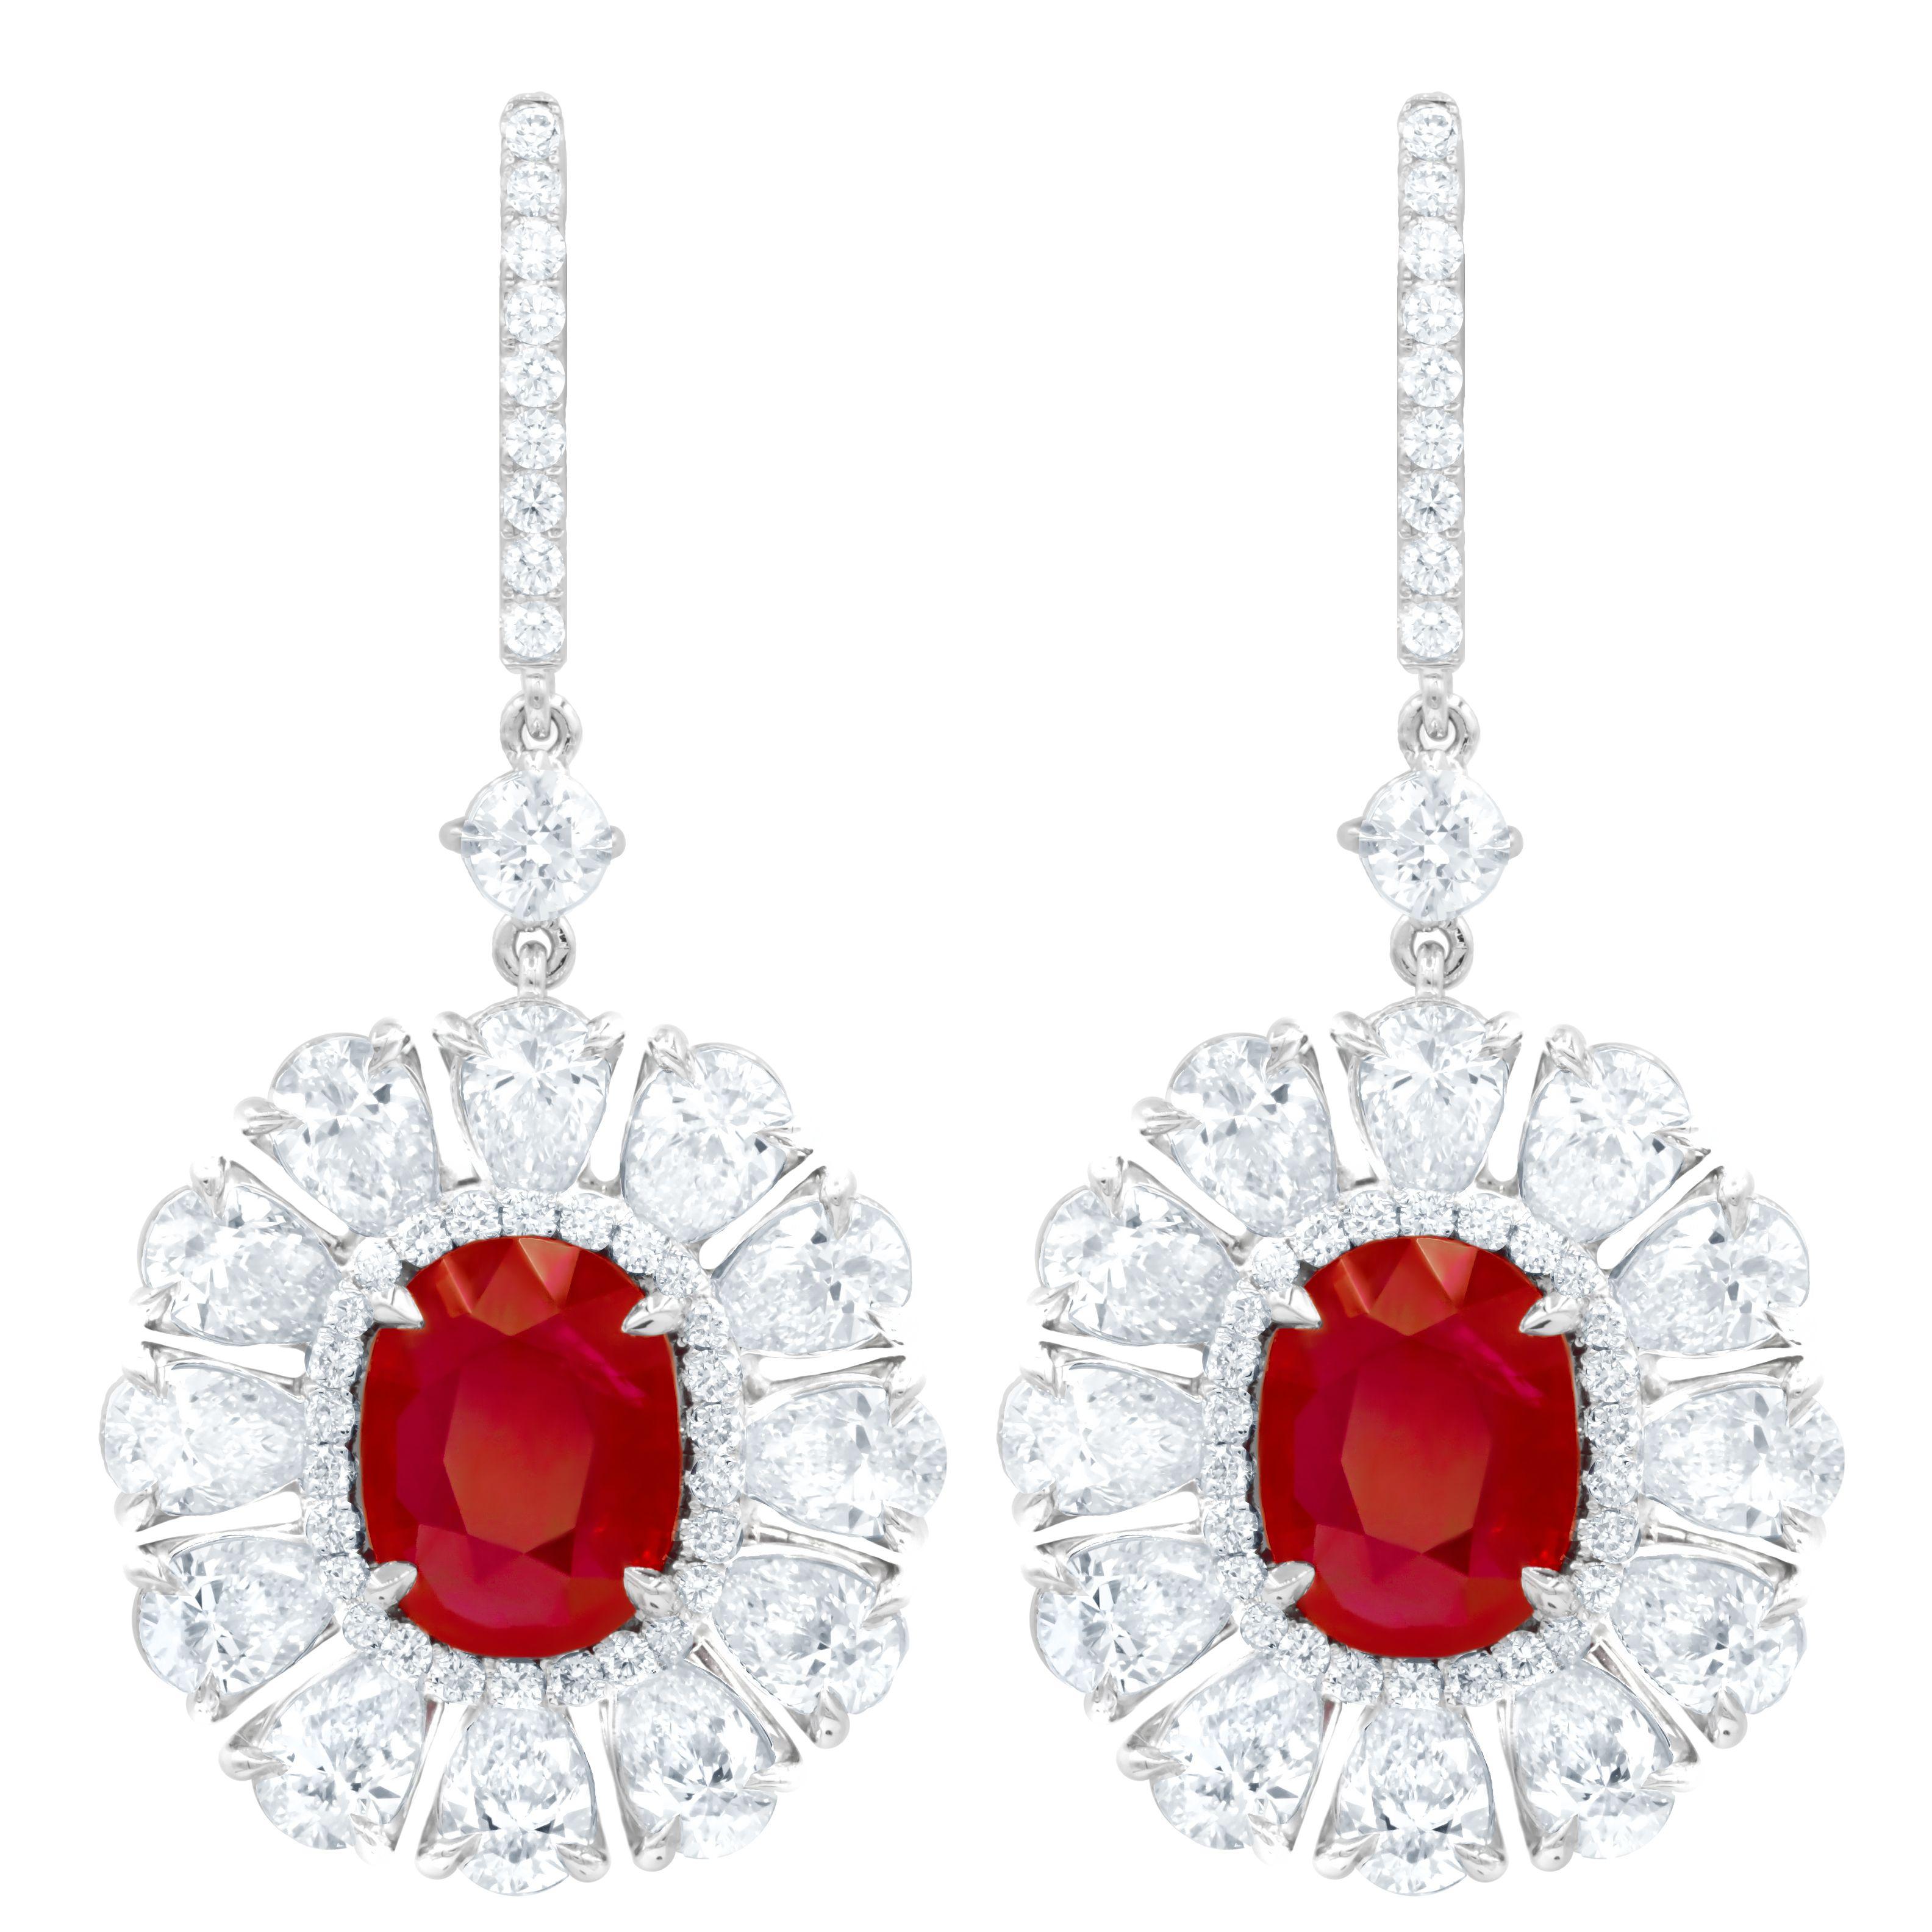 18kt white gold oval shape ruby GIA Certified earrings features: 6.69ct ruby, set in a halo with pear shape diamonds all around shaped like a flower with a total of 8.30cts of white diamonds.